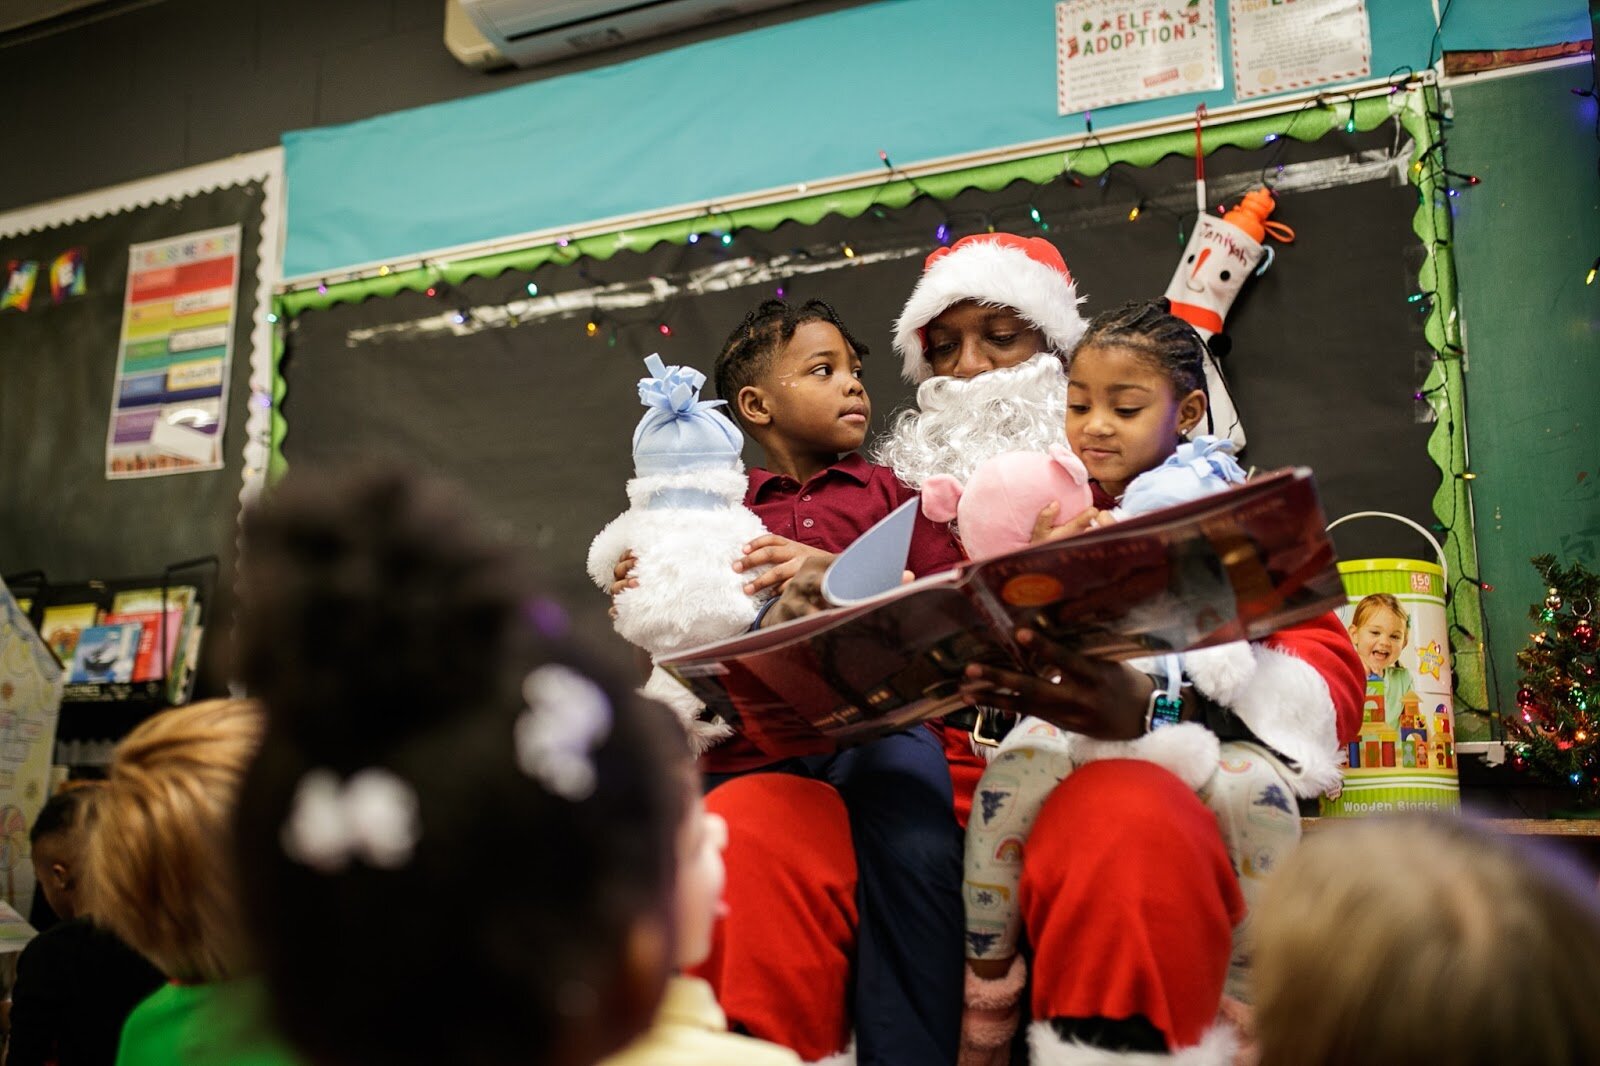 Genesee County Sheriff Deputy Blanding reads The Polar Express to kindergarteners during Freeman Elementary’s holiday celebration of literacy and reading comprehension on Friday, Dec. 16, 2022. (Jenifer Veloso | Flintside)